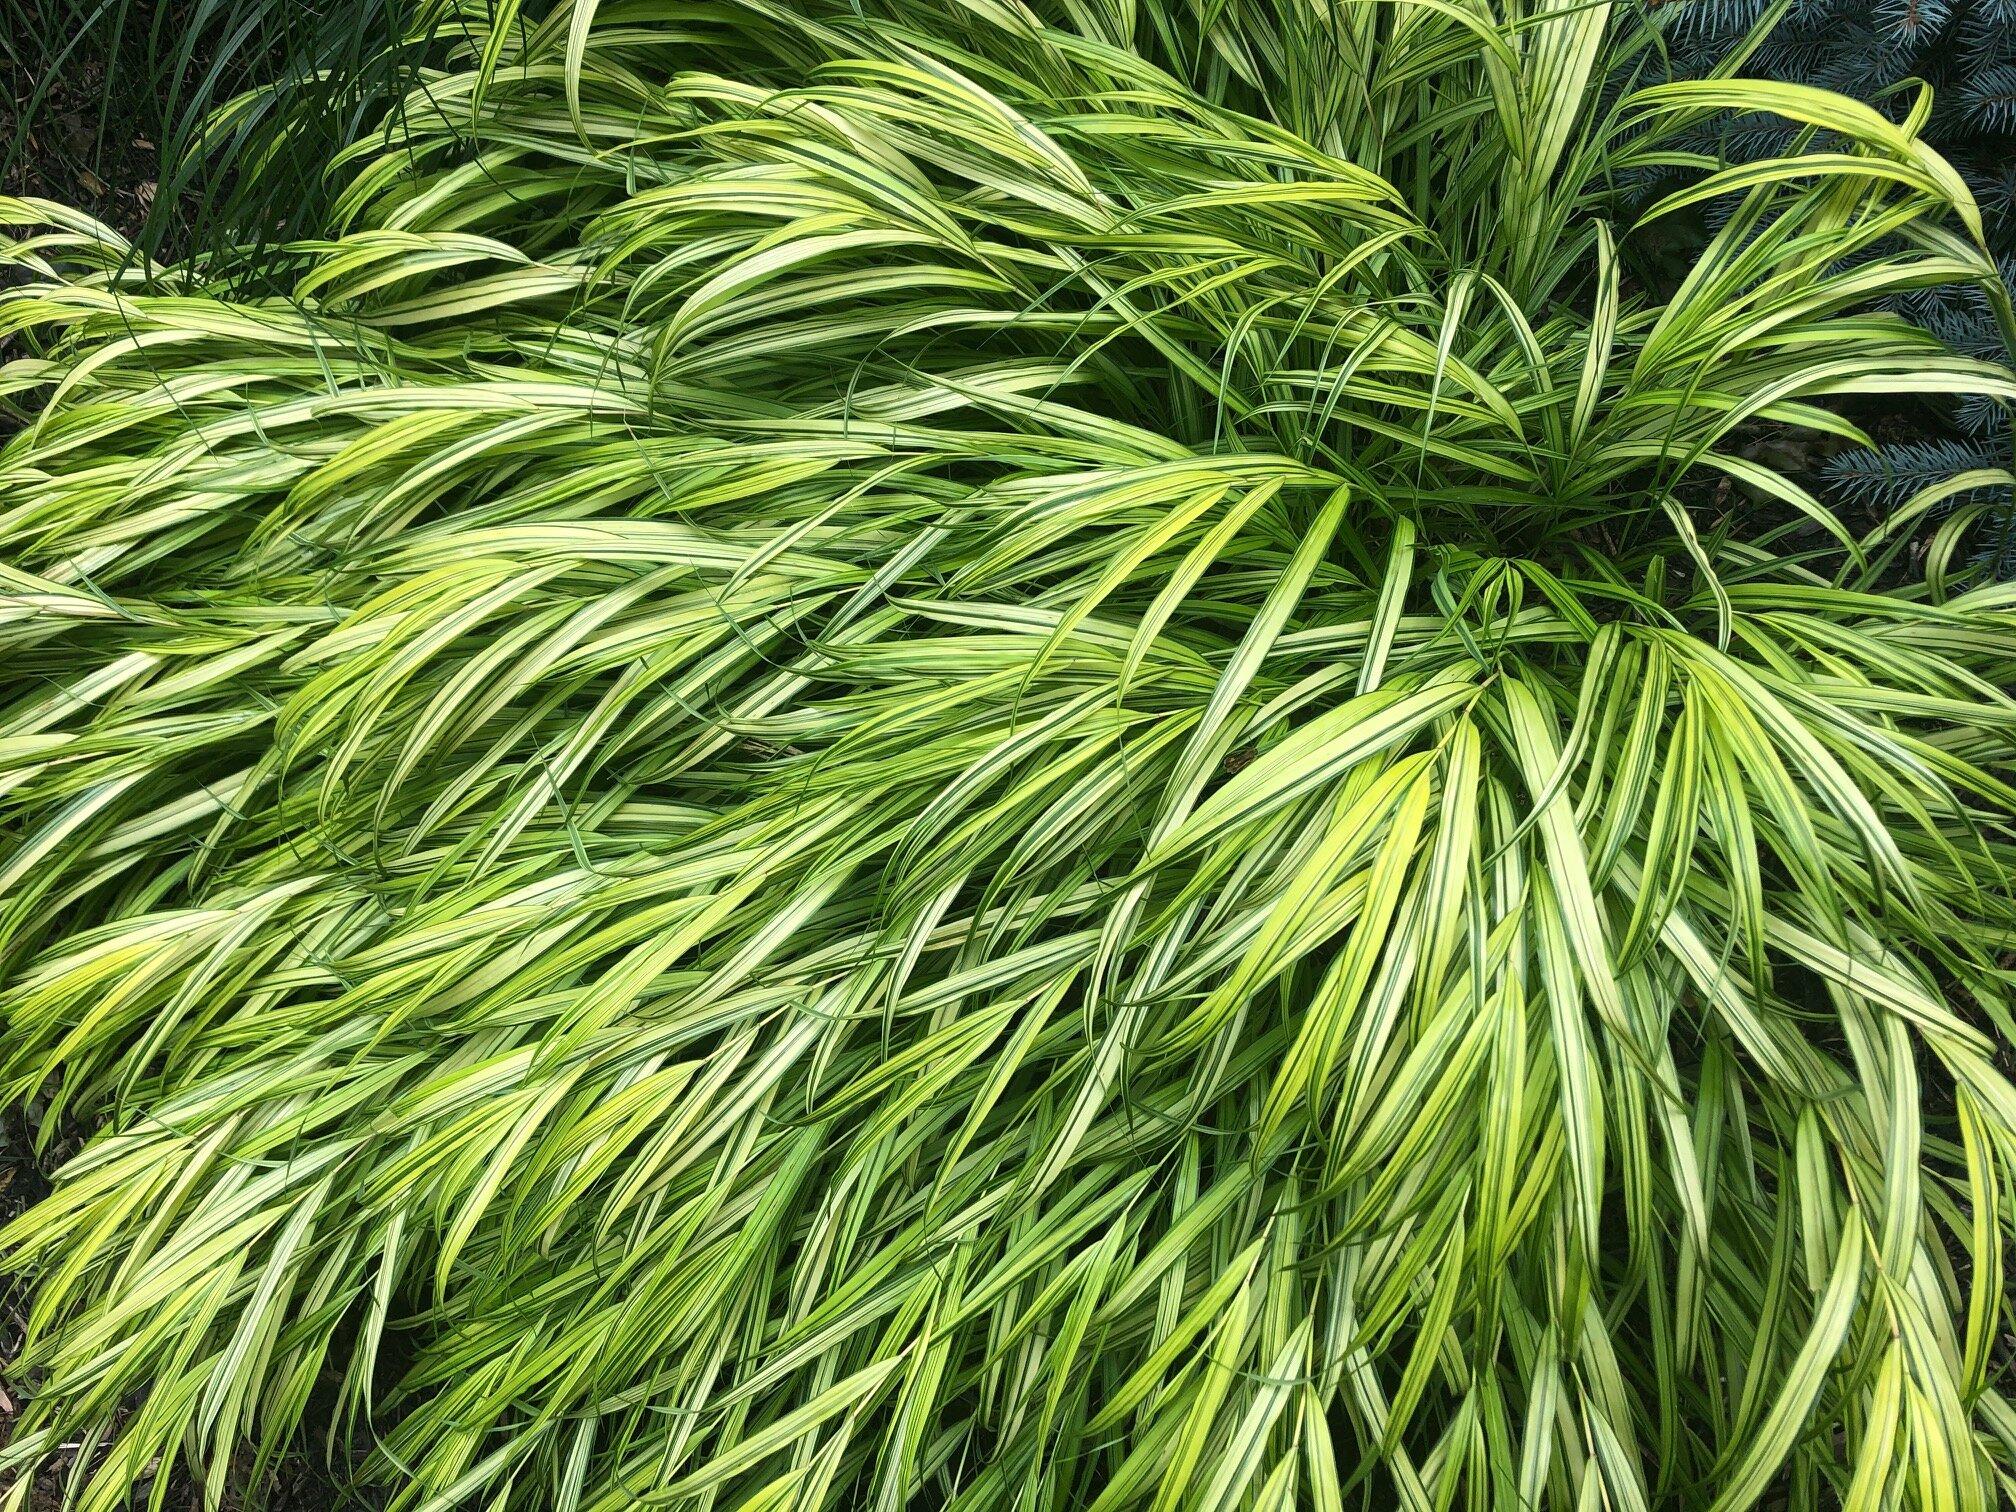 Hakonechloa aurelia (Japanese Forest Grass) is an outstanding warm-summer grass that is one of the few grasses that thrives in full shade, making it perfect for the woodland garden.